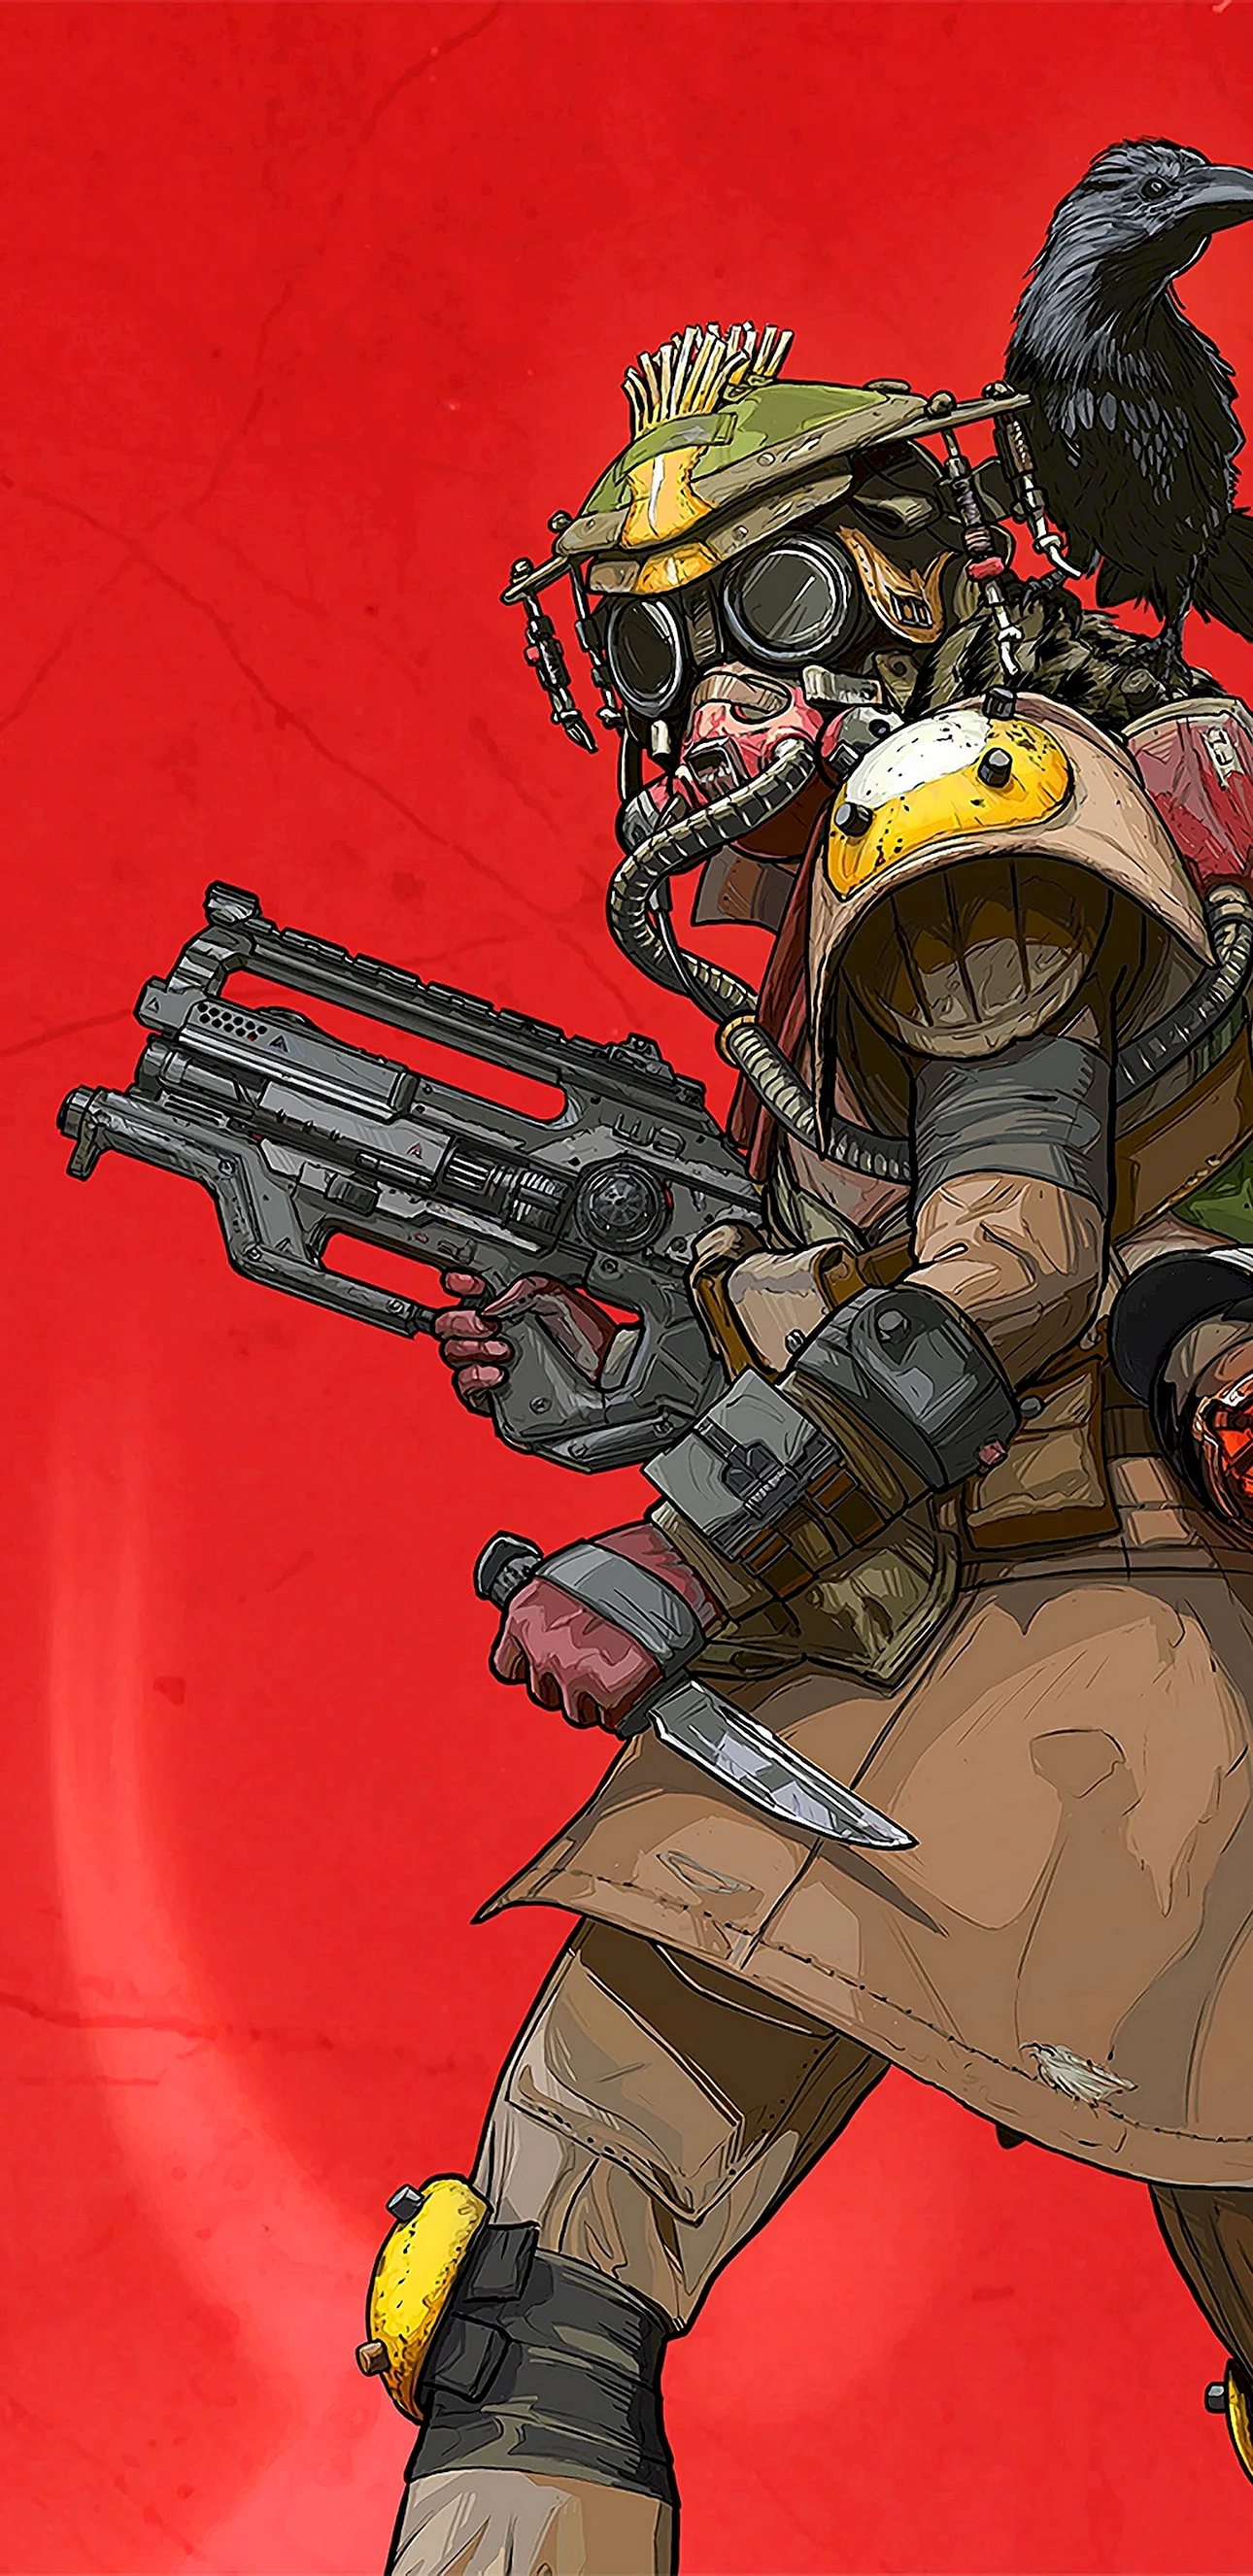 Bloodhound Apex Legends Wallpaper For iPhone